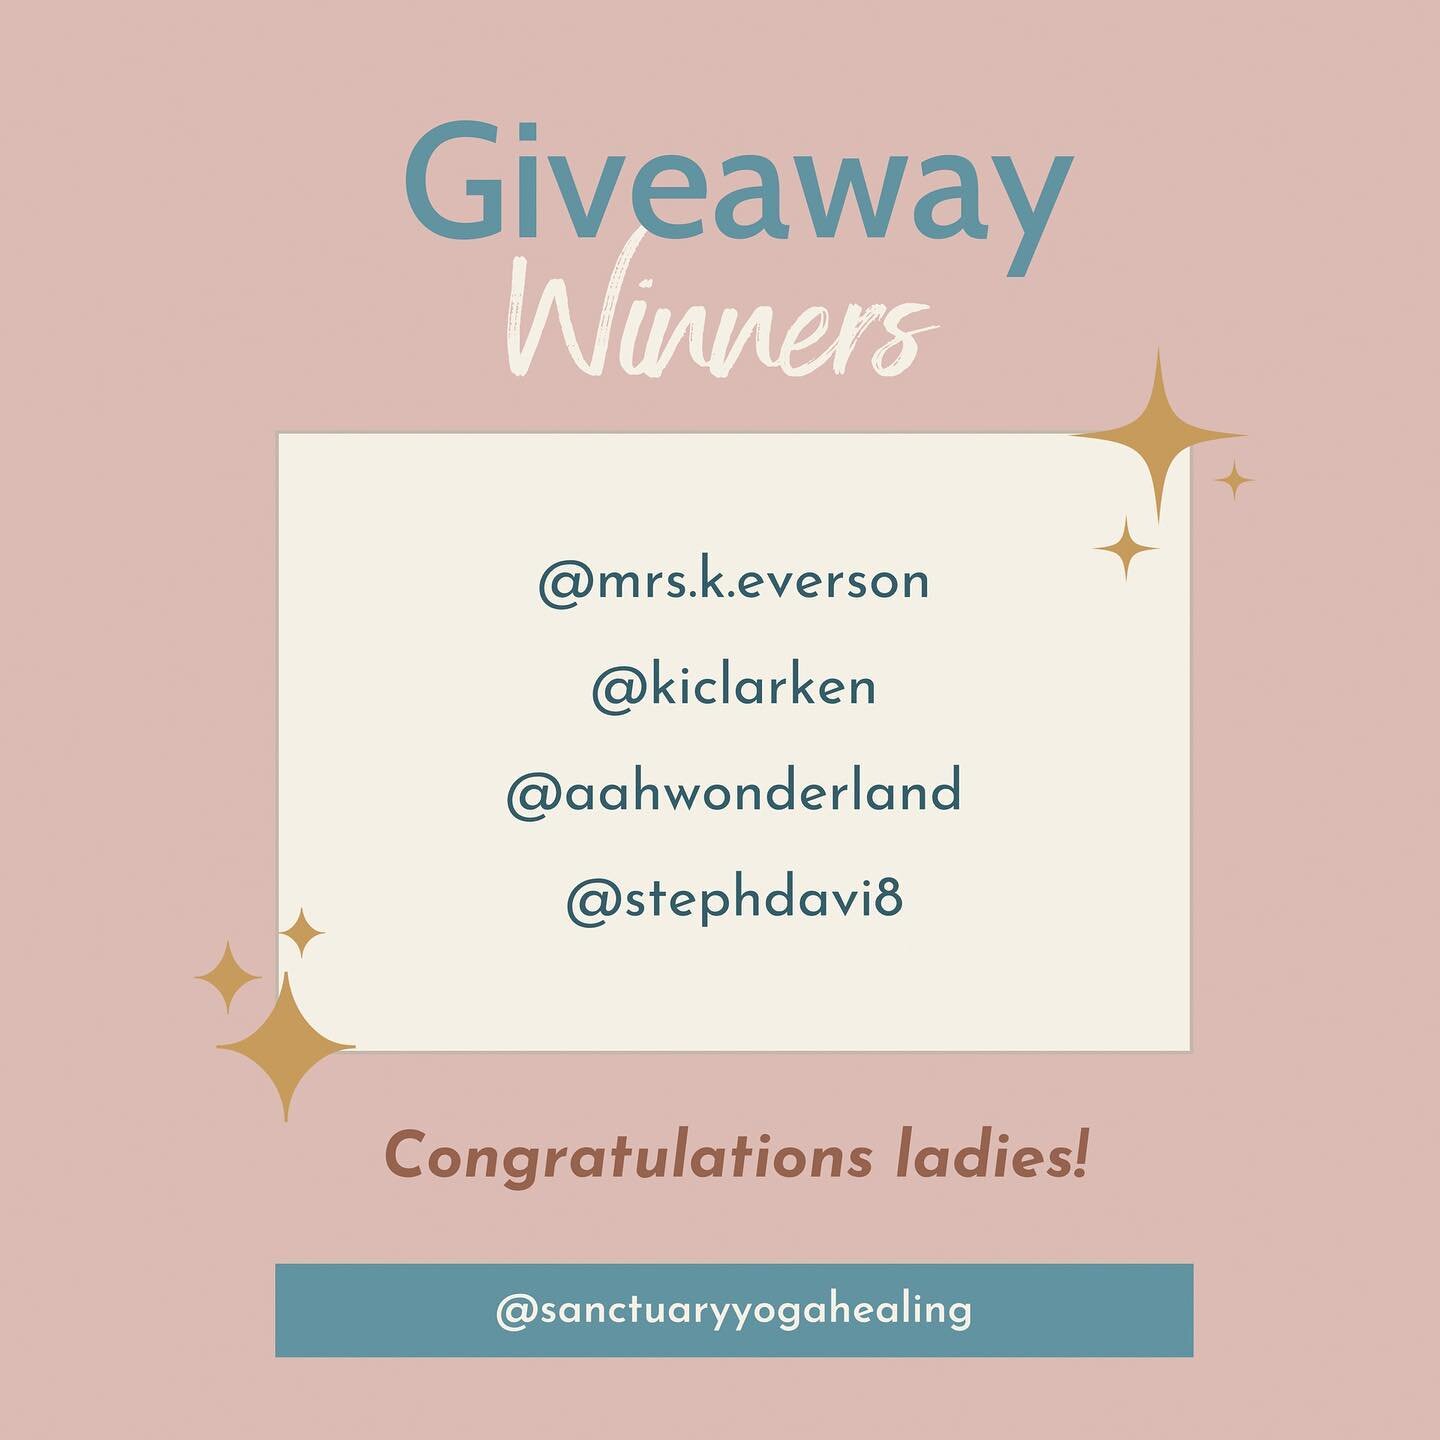 CONGRATULATIONS to our giveaway winners @mrs.k.everson @kiclarken @aahwonderland and @stephdavi8 🤗
✨
Thank you SO much too all who showed us some love during our business launch and for entering the giveaway! We look forward to having you in the stu